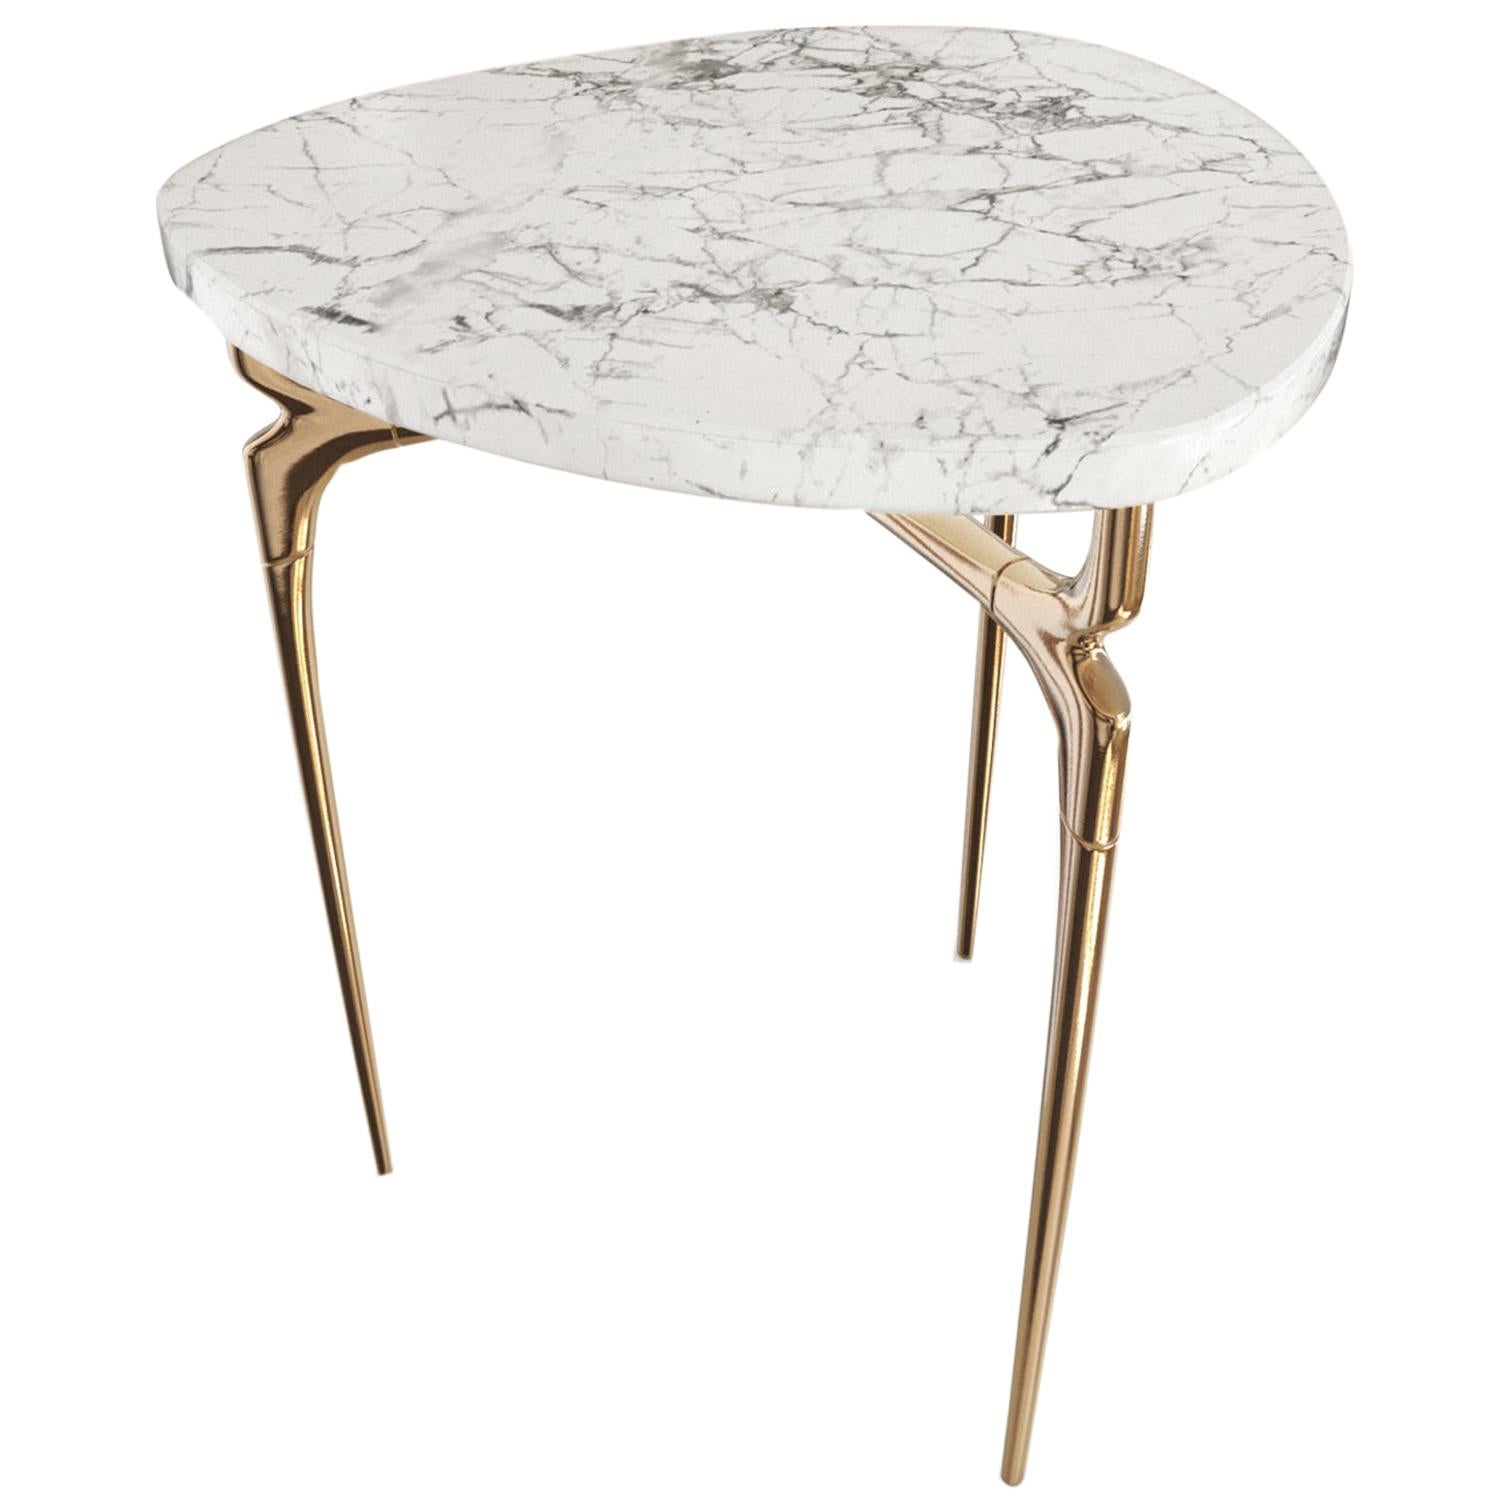  Avalon Table - Polished Bronze & Marble Top - Design by Michael Sean Stolworthy For Sale